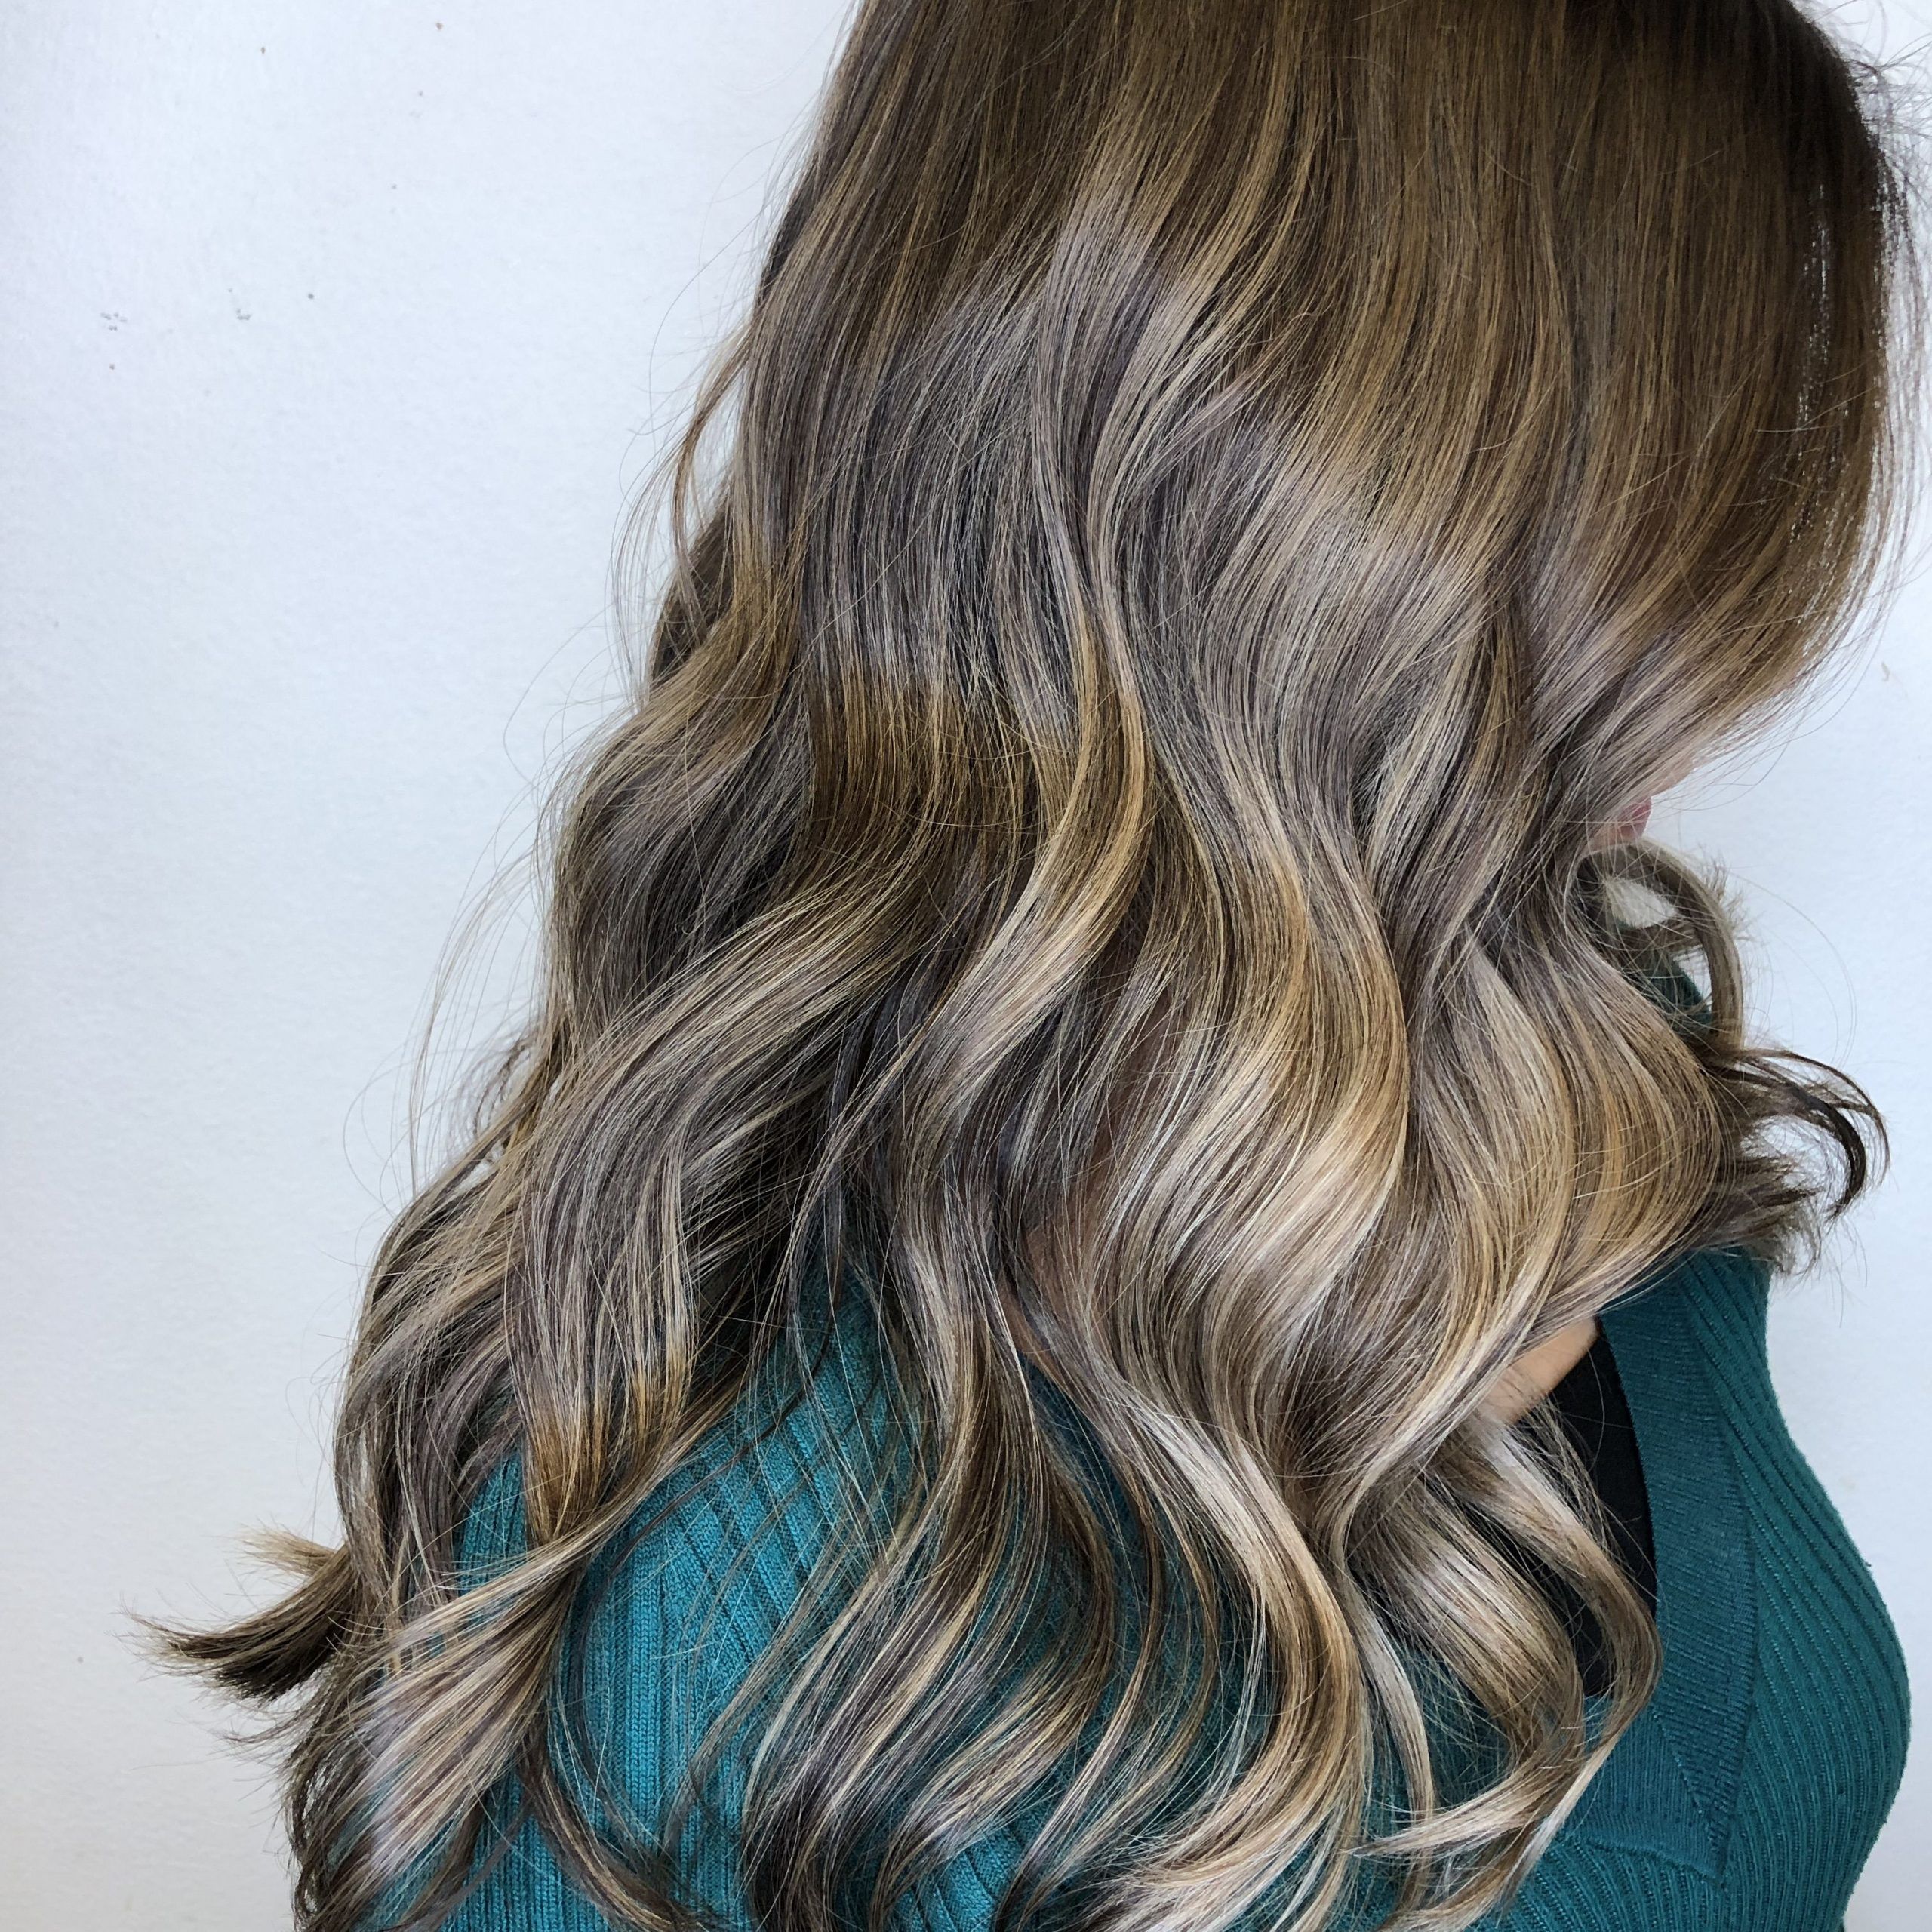 Ash Blonde Balayage | Ash Blonde Balayage, Blonde Balayage Intended For Ash Blonde Balayage For Short Stacked Bob Hairstyles (View 13 of 20)